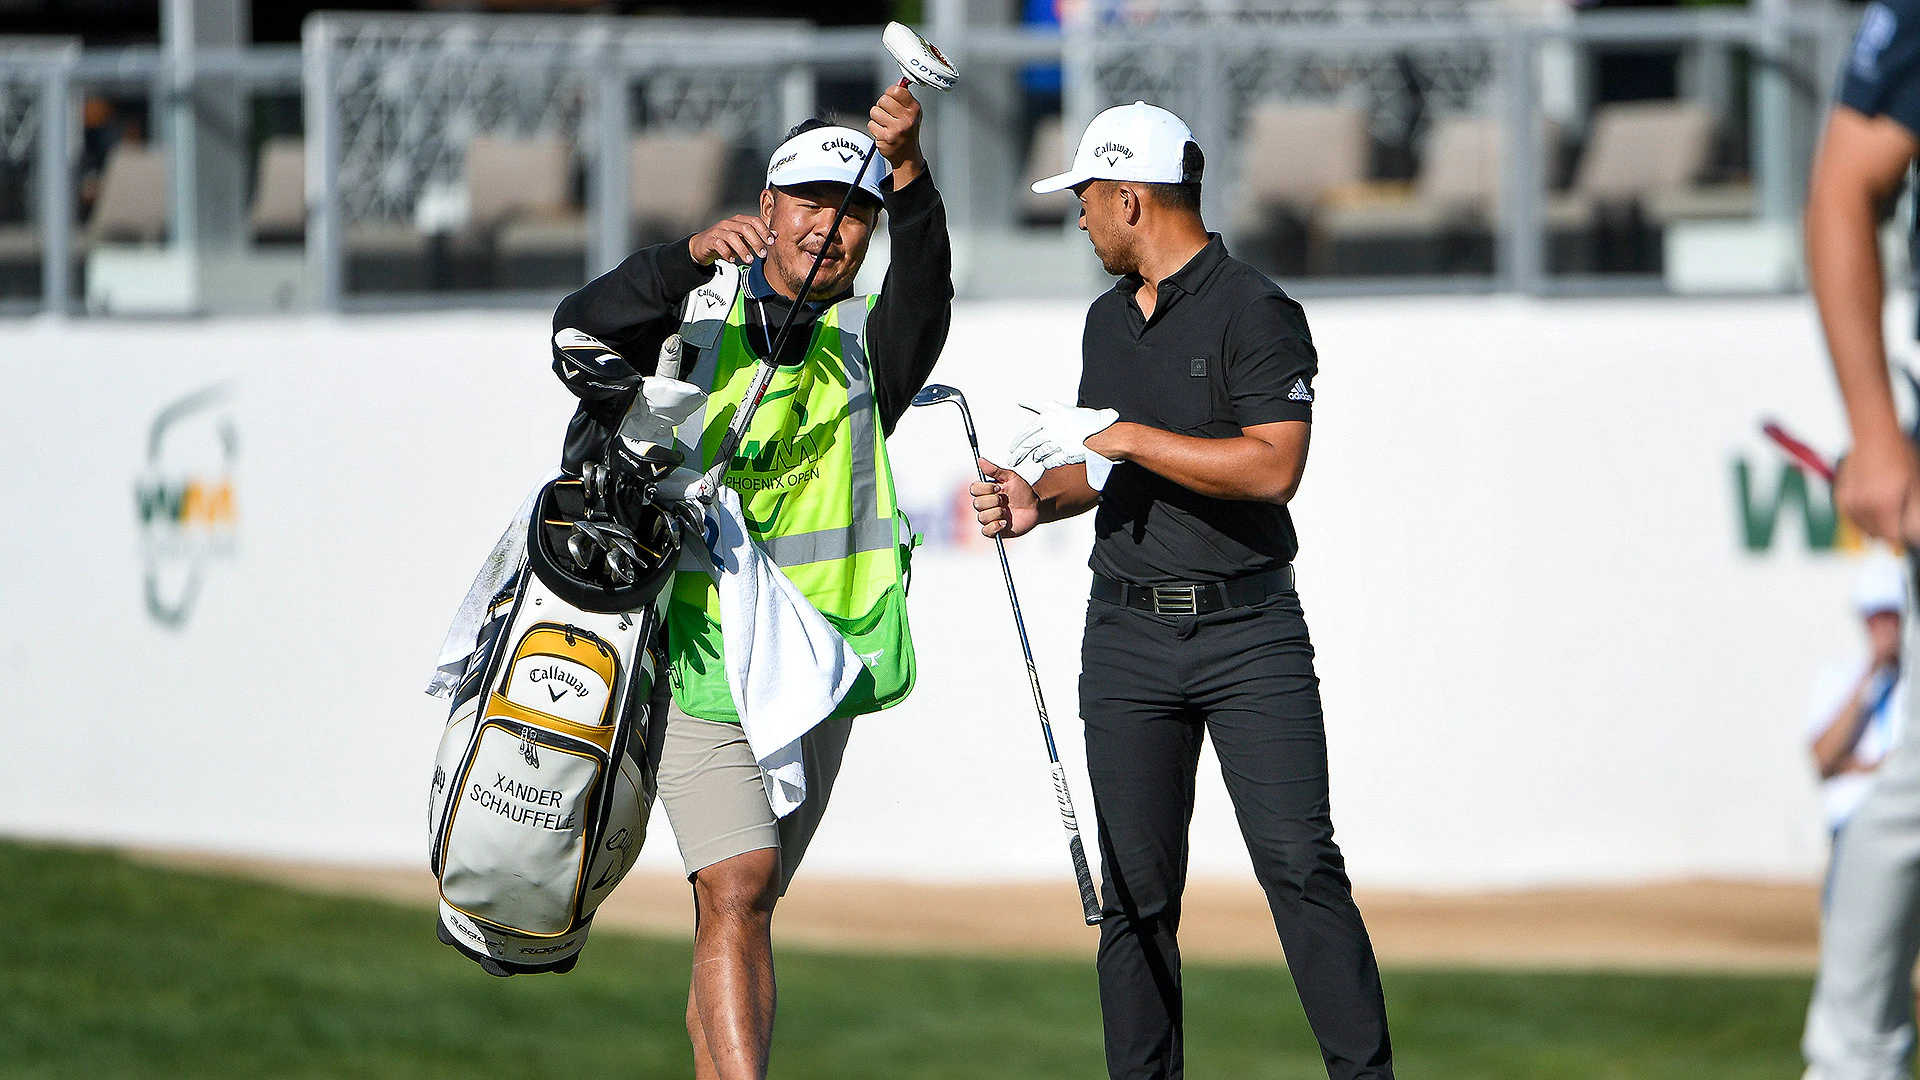 Schauffele Loses Caddie To COVID, Xander's Okay For Now